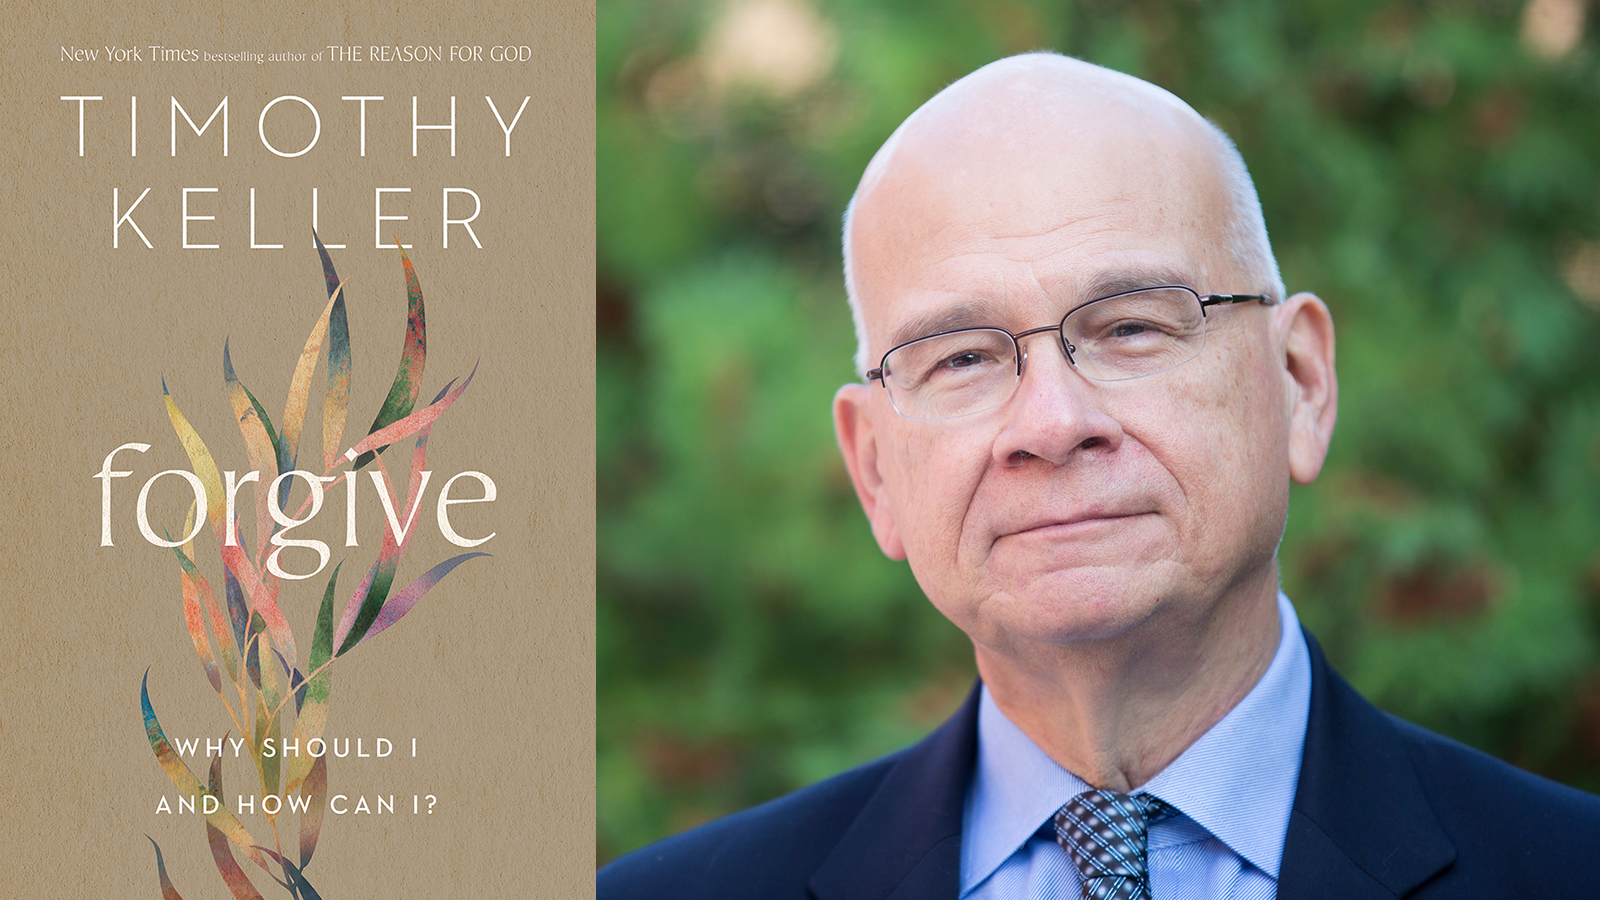 "Forgive: Why Should I and How Can I?" and author Timothy Keller. Photo by Andrew Chan